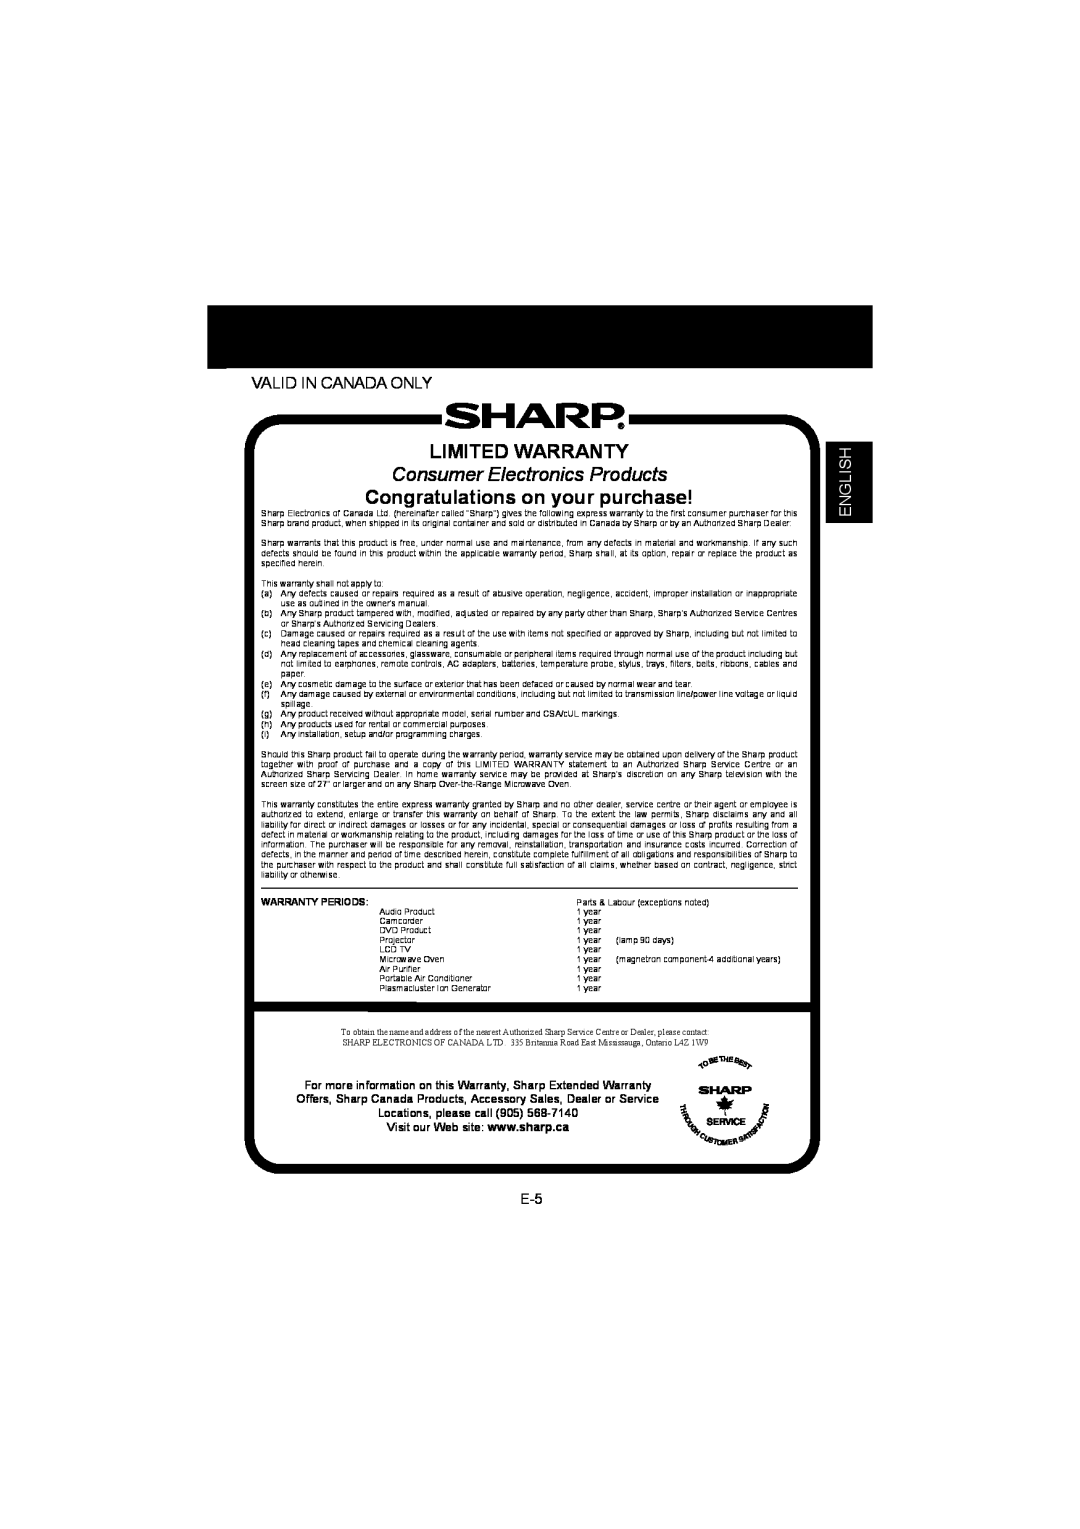 Sharp IG-BC2UB Consumer Electronics Products, Limited Warranty, Congratulations on your purchase, English 